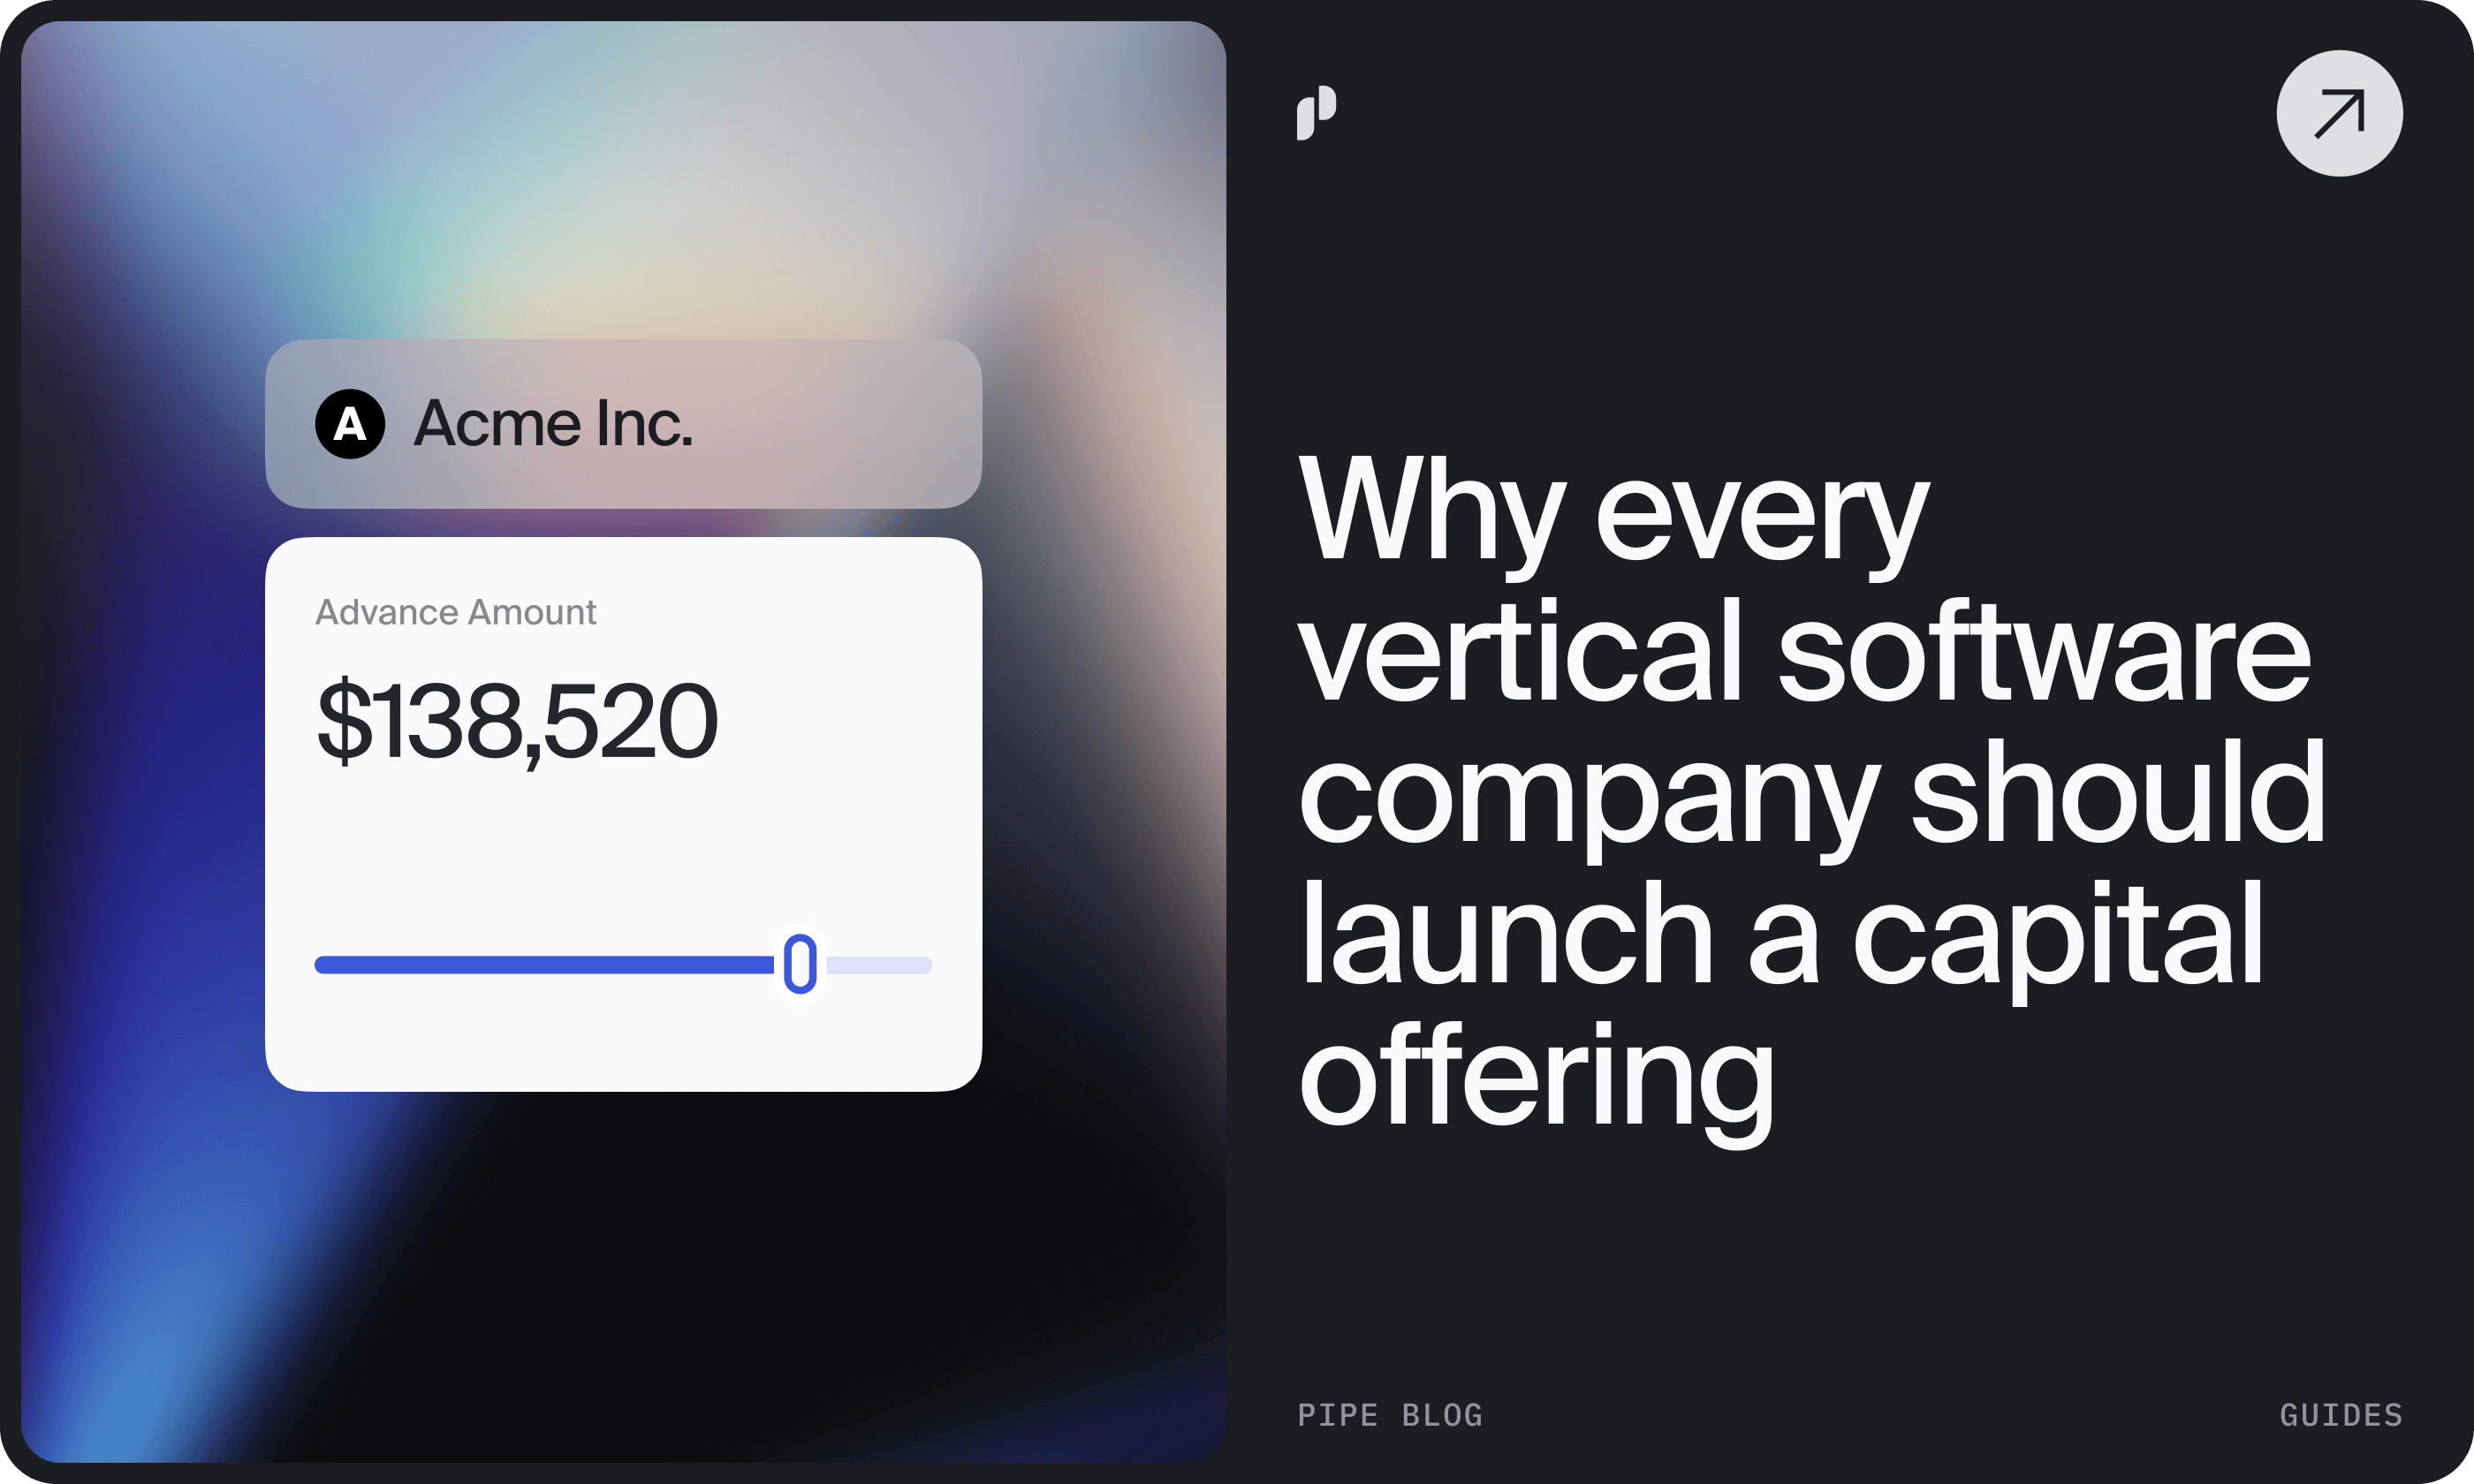 Why every vertical software company should launch a capital offering